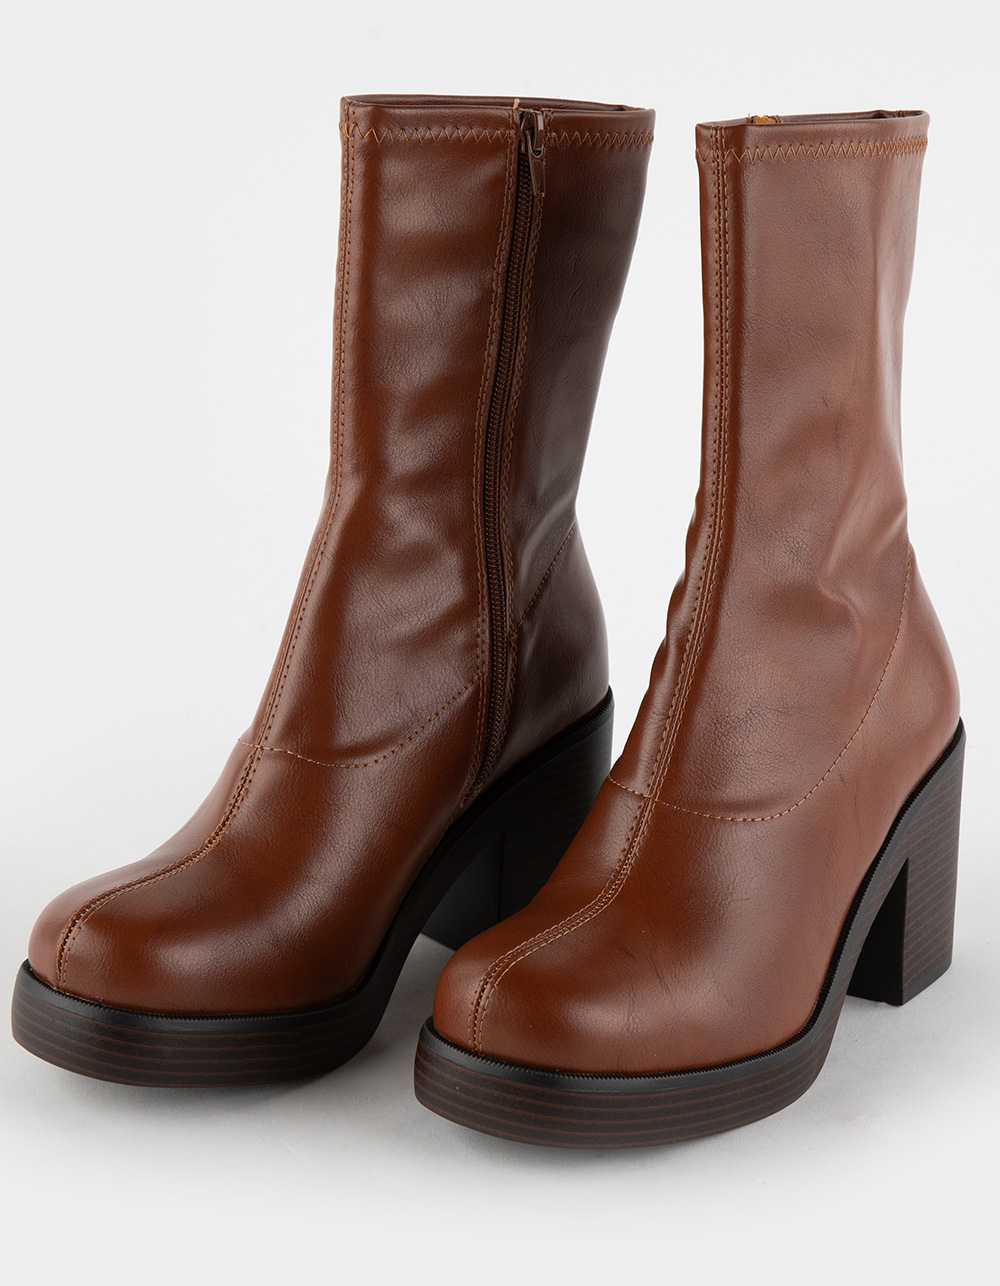 SODA Stretch Faux Leather Womens Boots